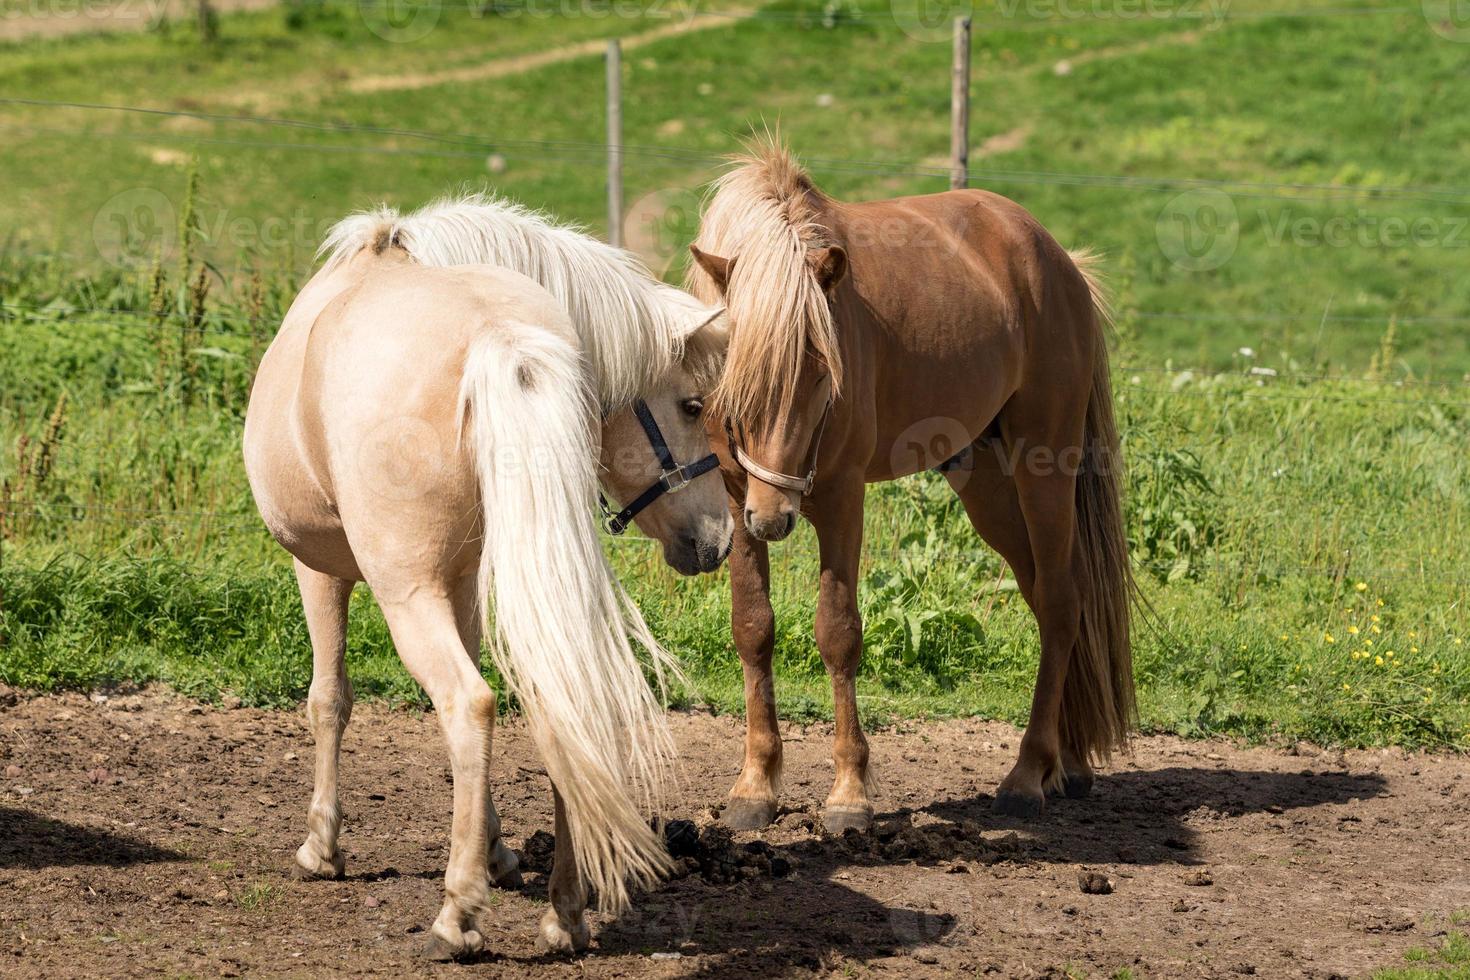 Icelandic horses making friends prior to mating photo